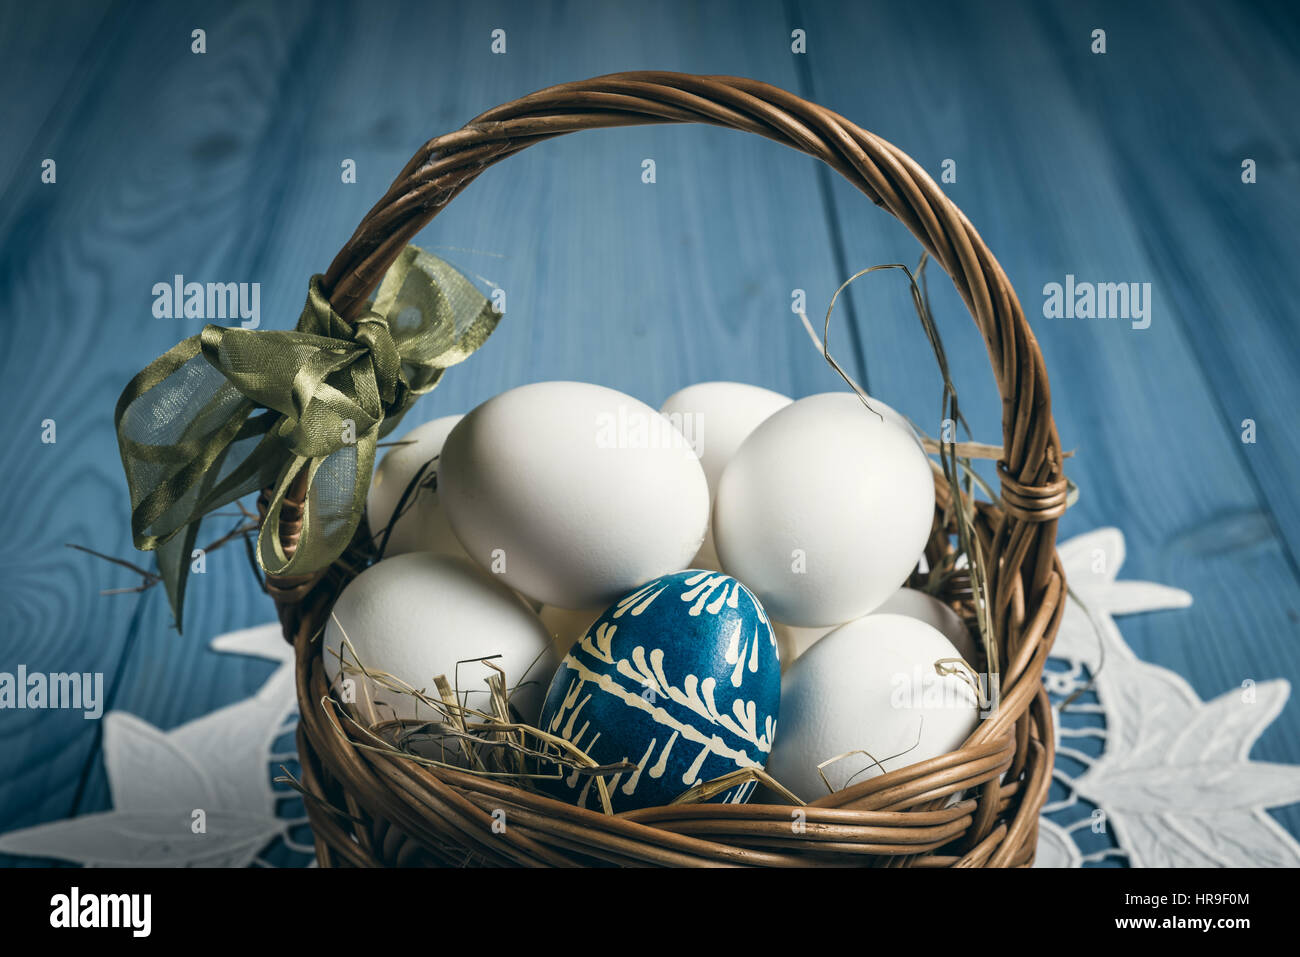 Group of eggs in the basket on the blue wooden surface. Easter concept. Stock Photo